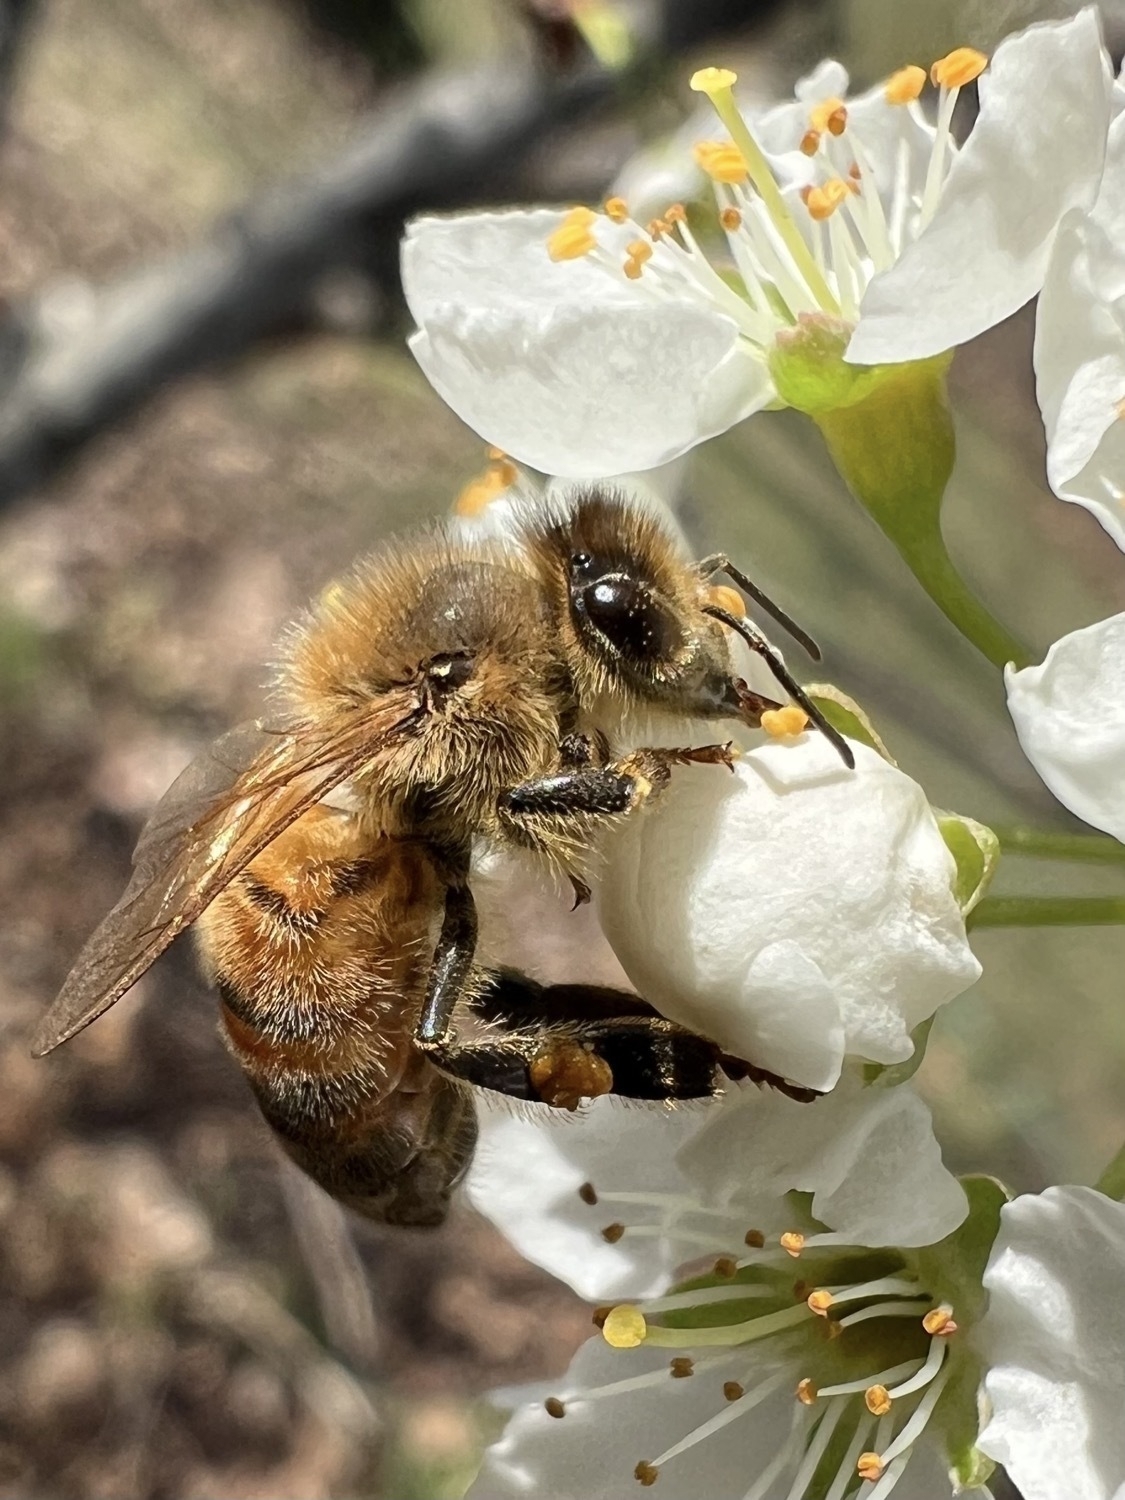 A macro image of a furry honeybee collecting pollen from white flowers